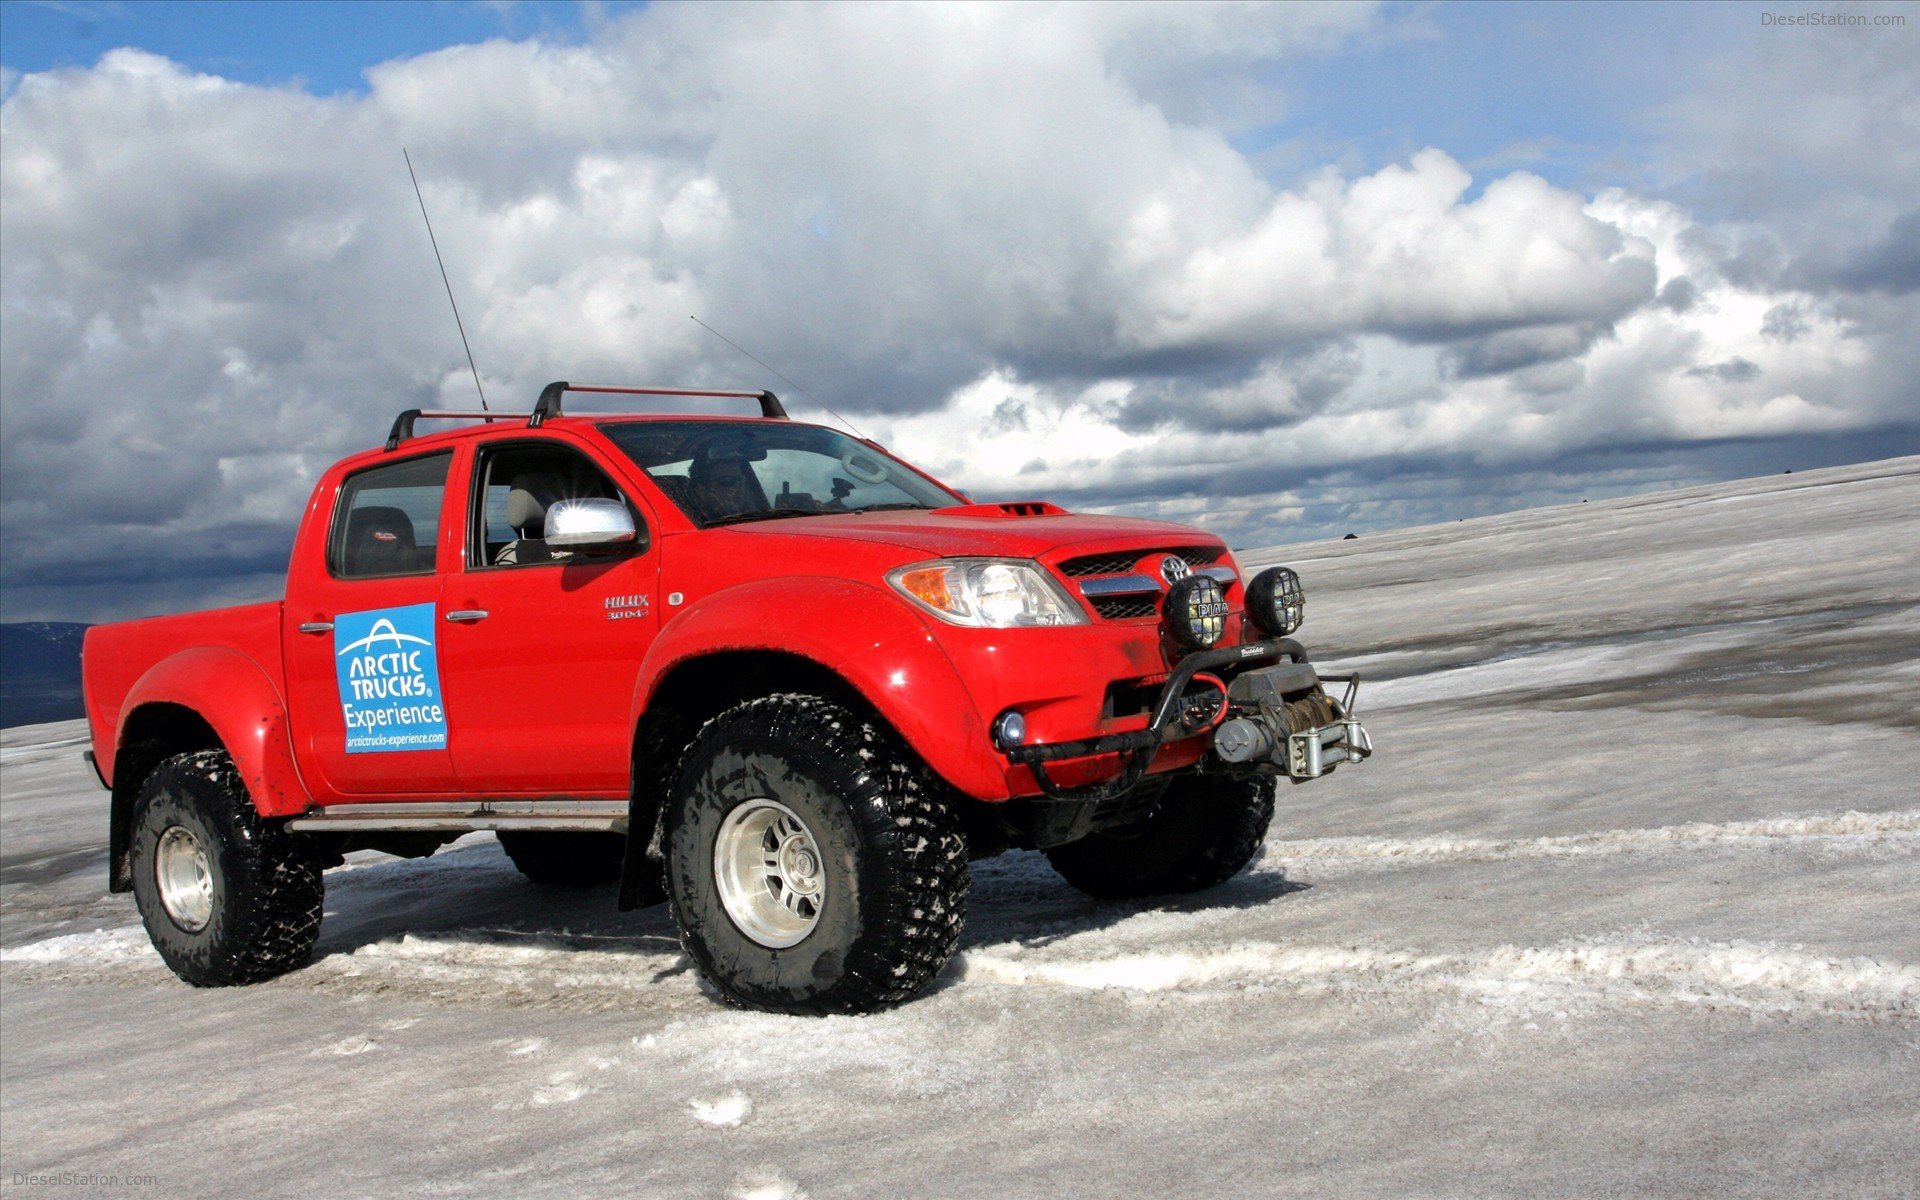 Toyota Hilux 2010 Widescreen Exotic Car Photo 05 of 10